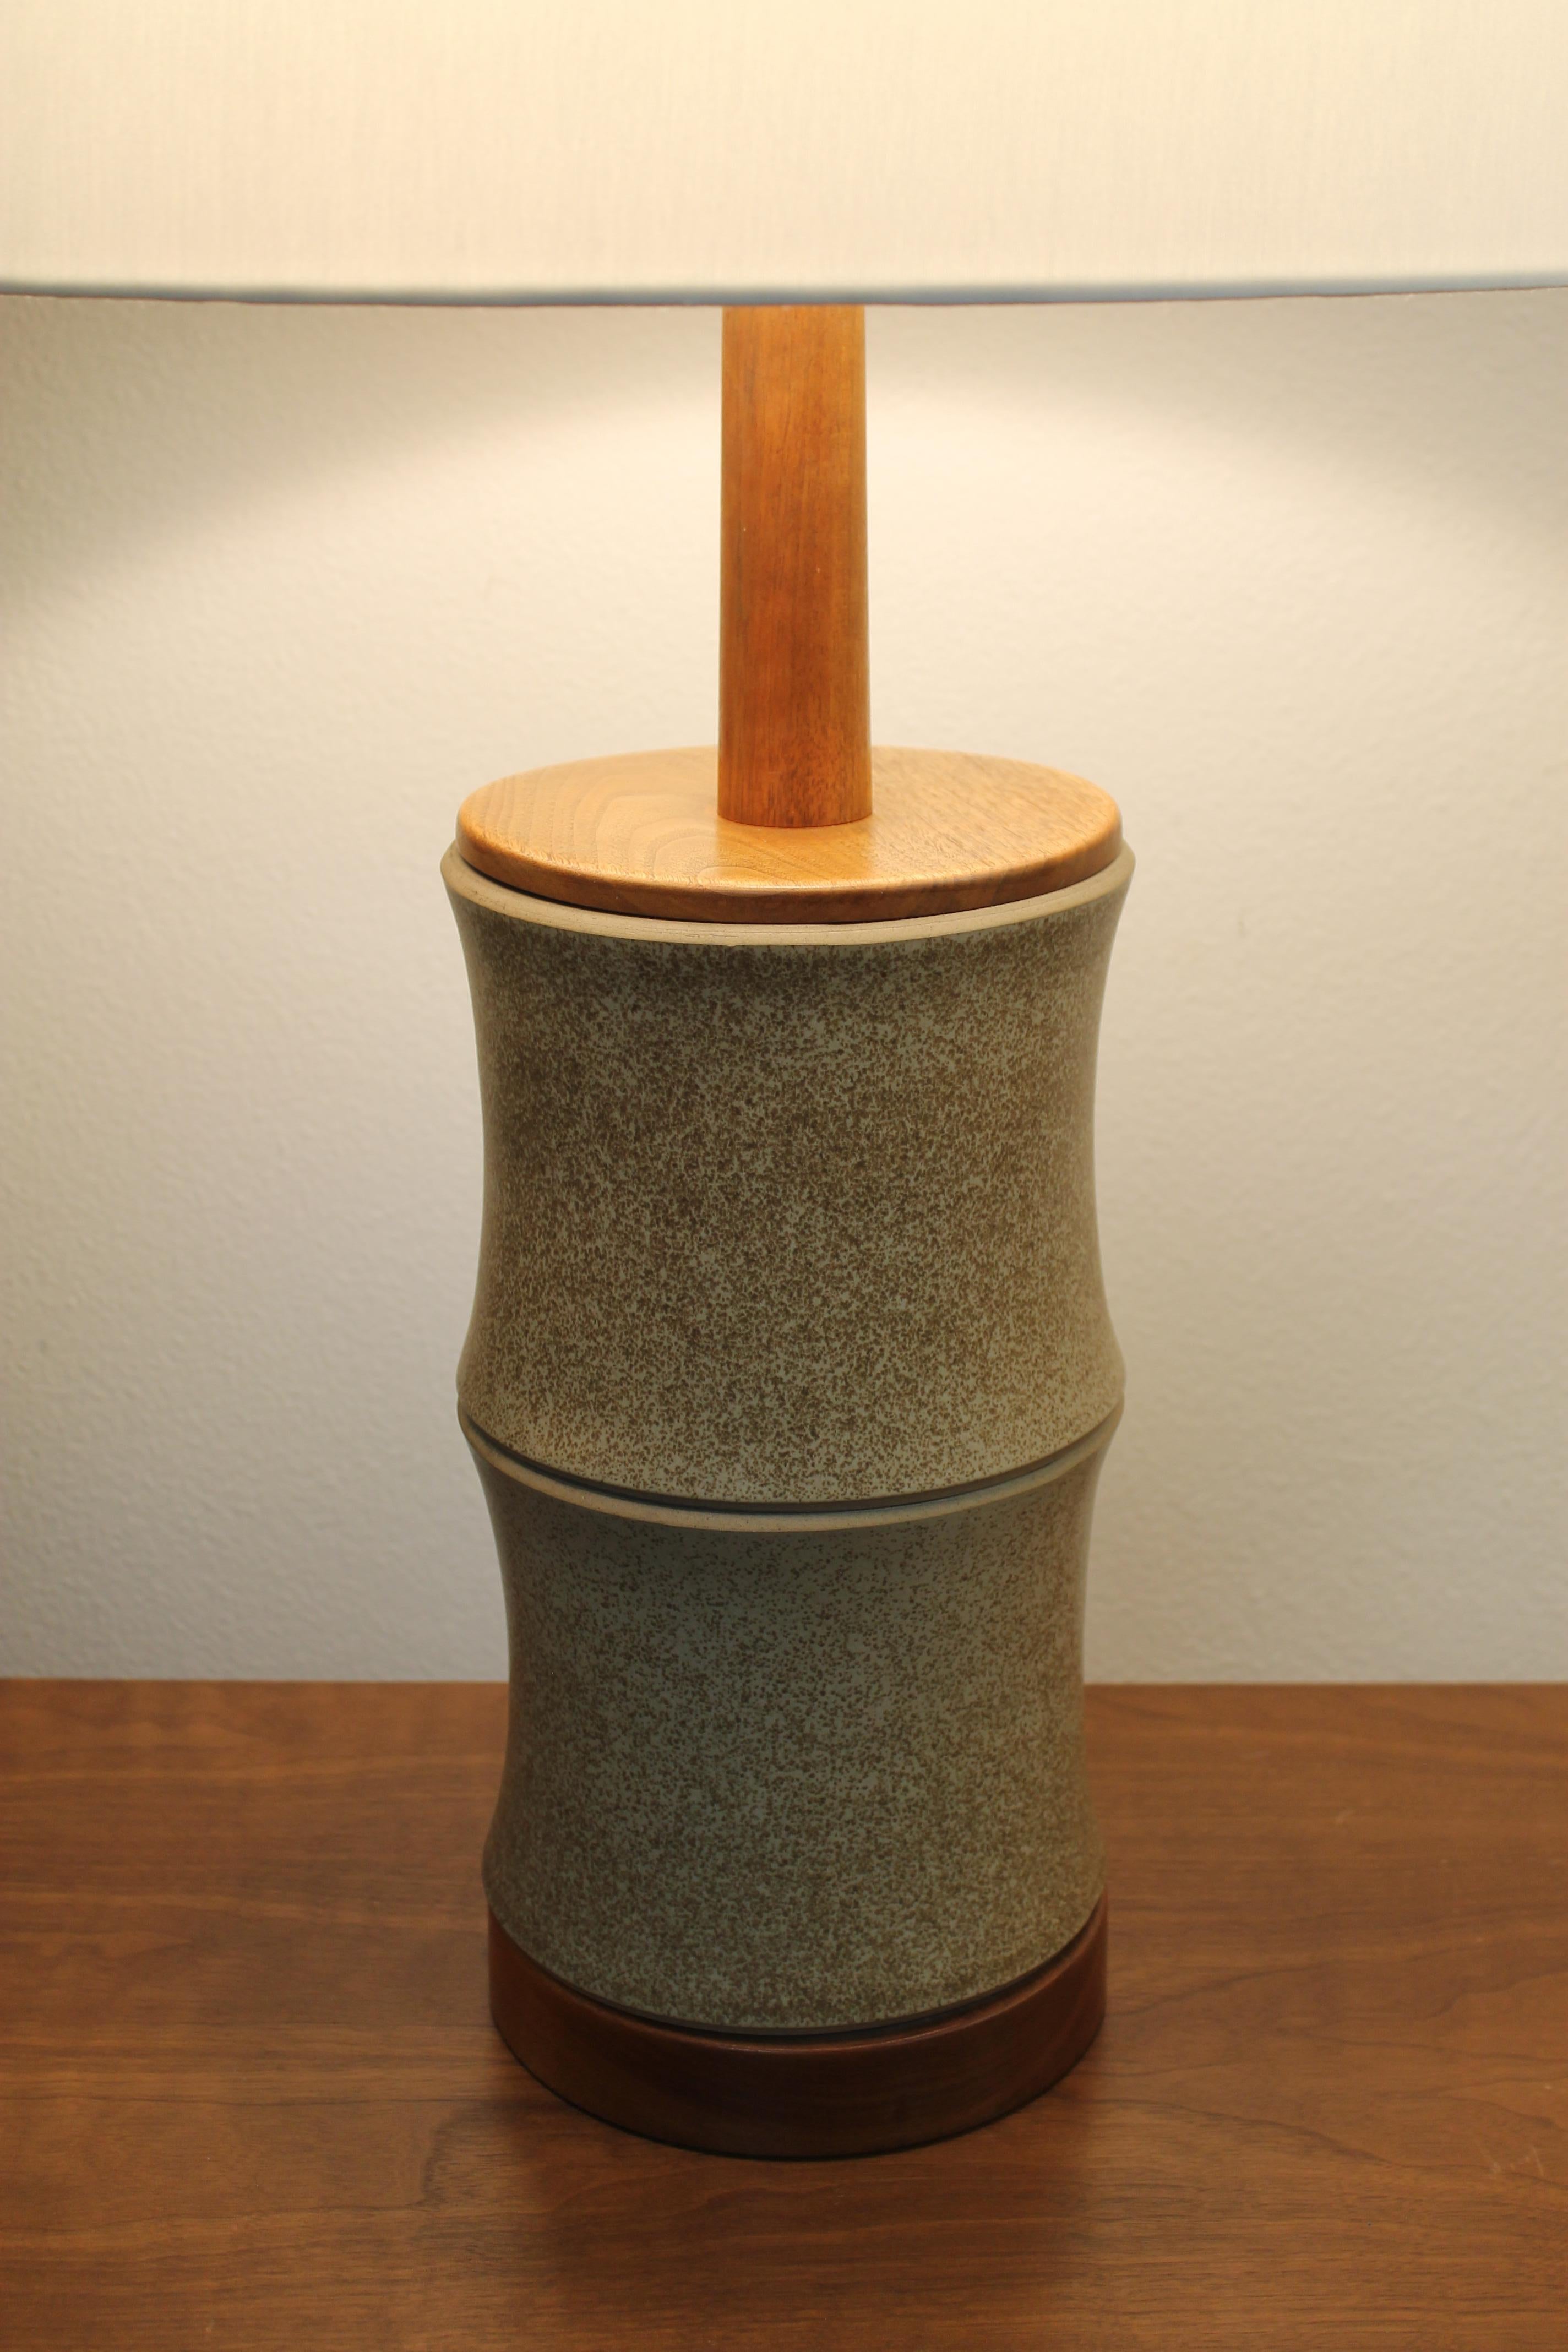 Pair of ceramic and wood Martz Lamps. Lamps have original finials and have been professionally rewired. Lamps measure 21